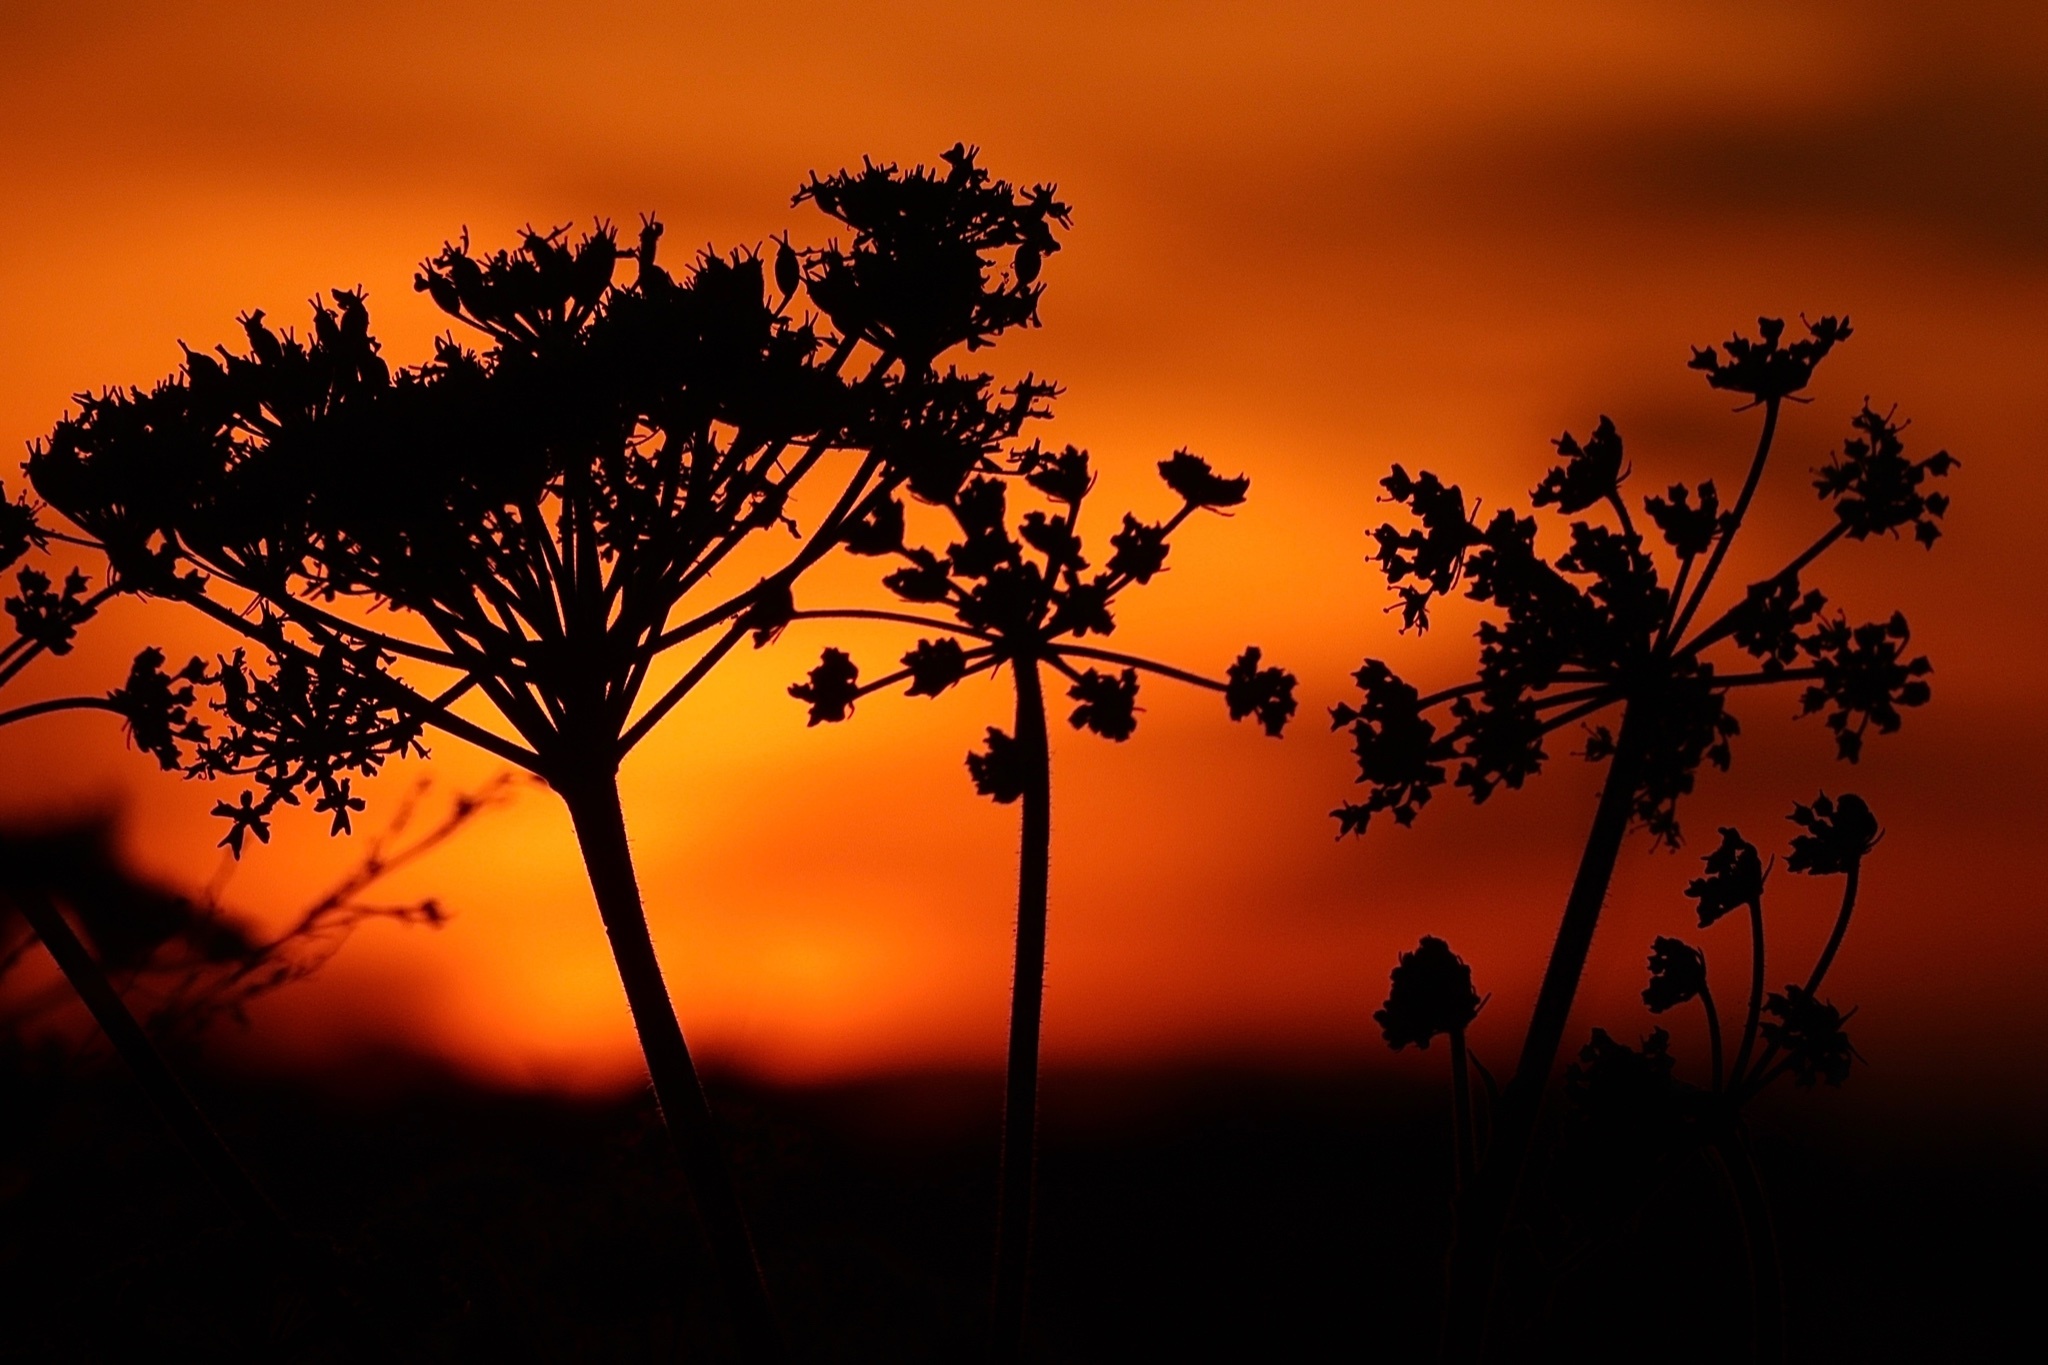 Silhouettes in the sunset (Mel Vickers)